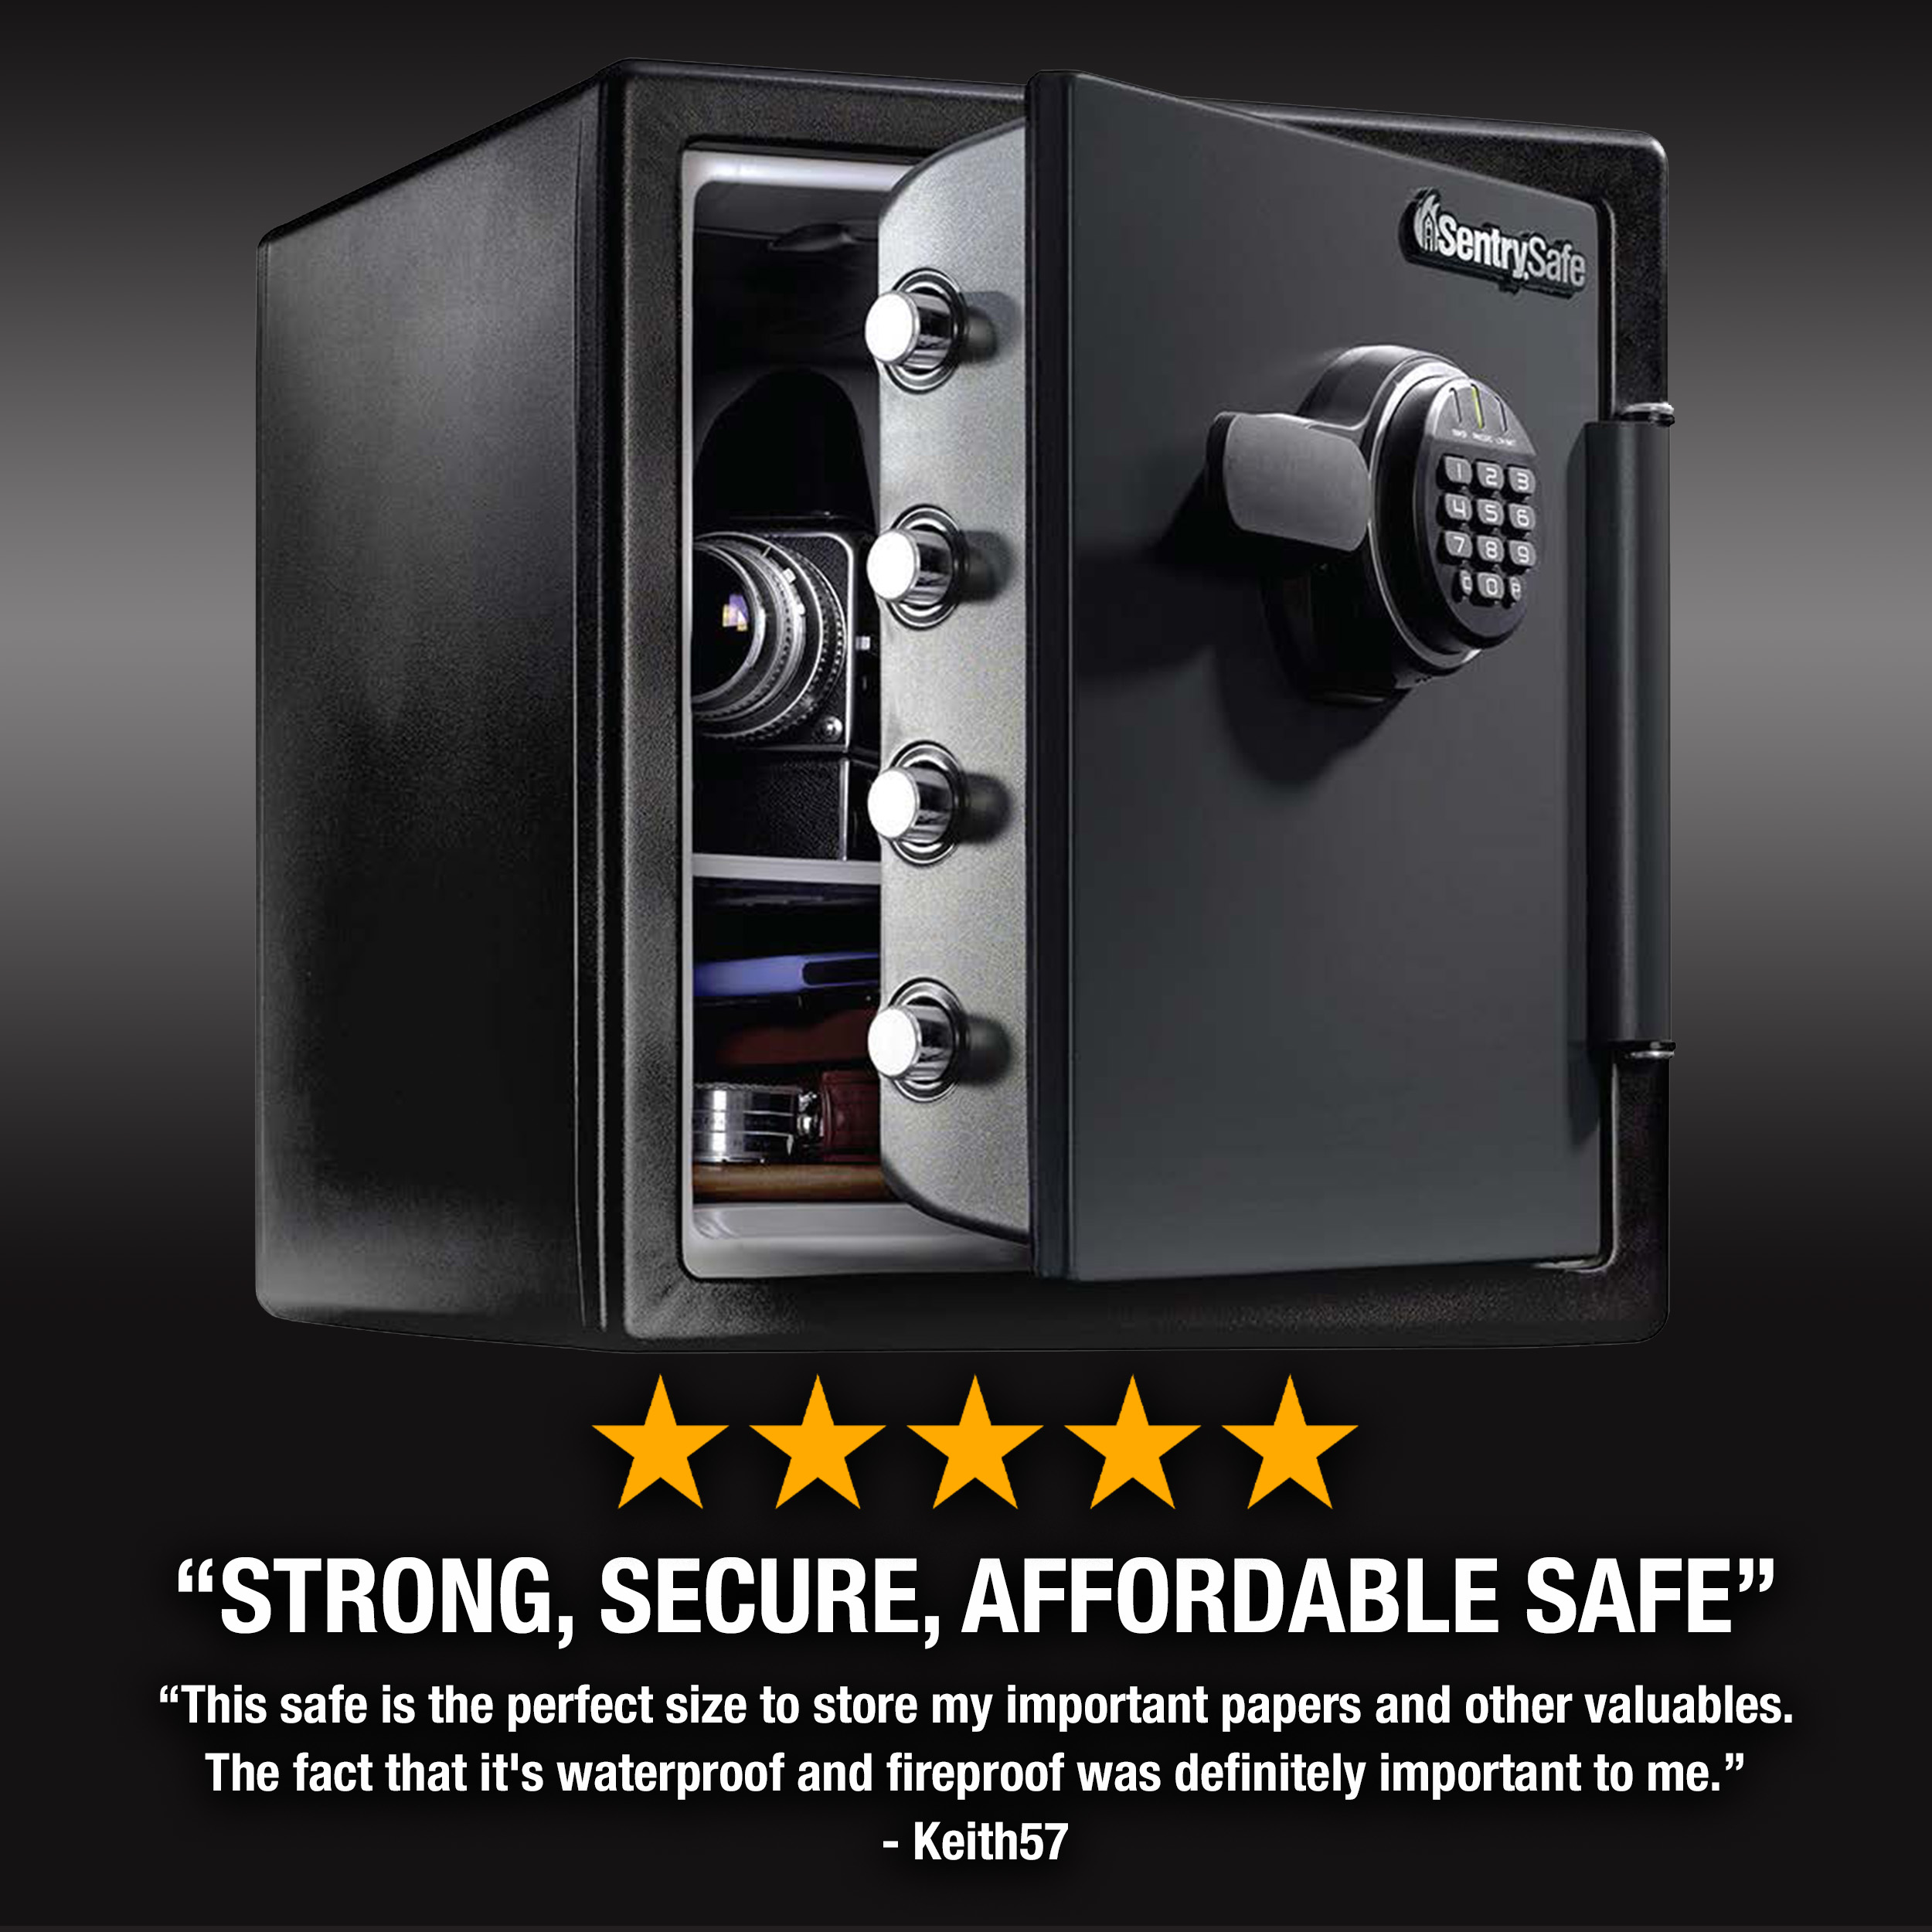 SentrySafe SFW123ES Water and Fire Resistant Safe with Digital Keypad Lock, 1.23 Cu. ft. - image 4 of 7